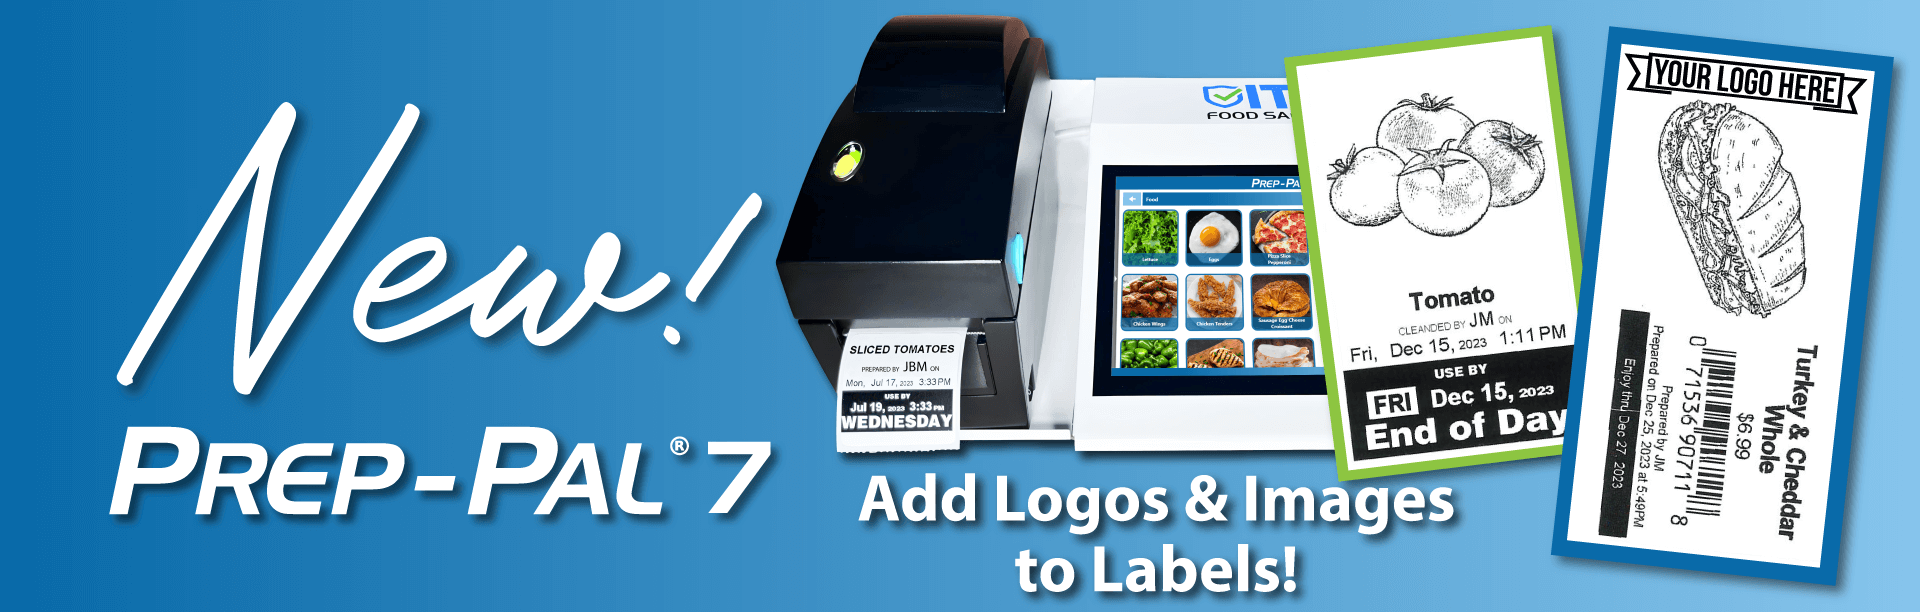 NEW - ADD logos and images to labels! Prep-N-Temp